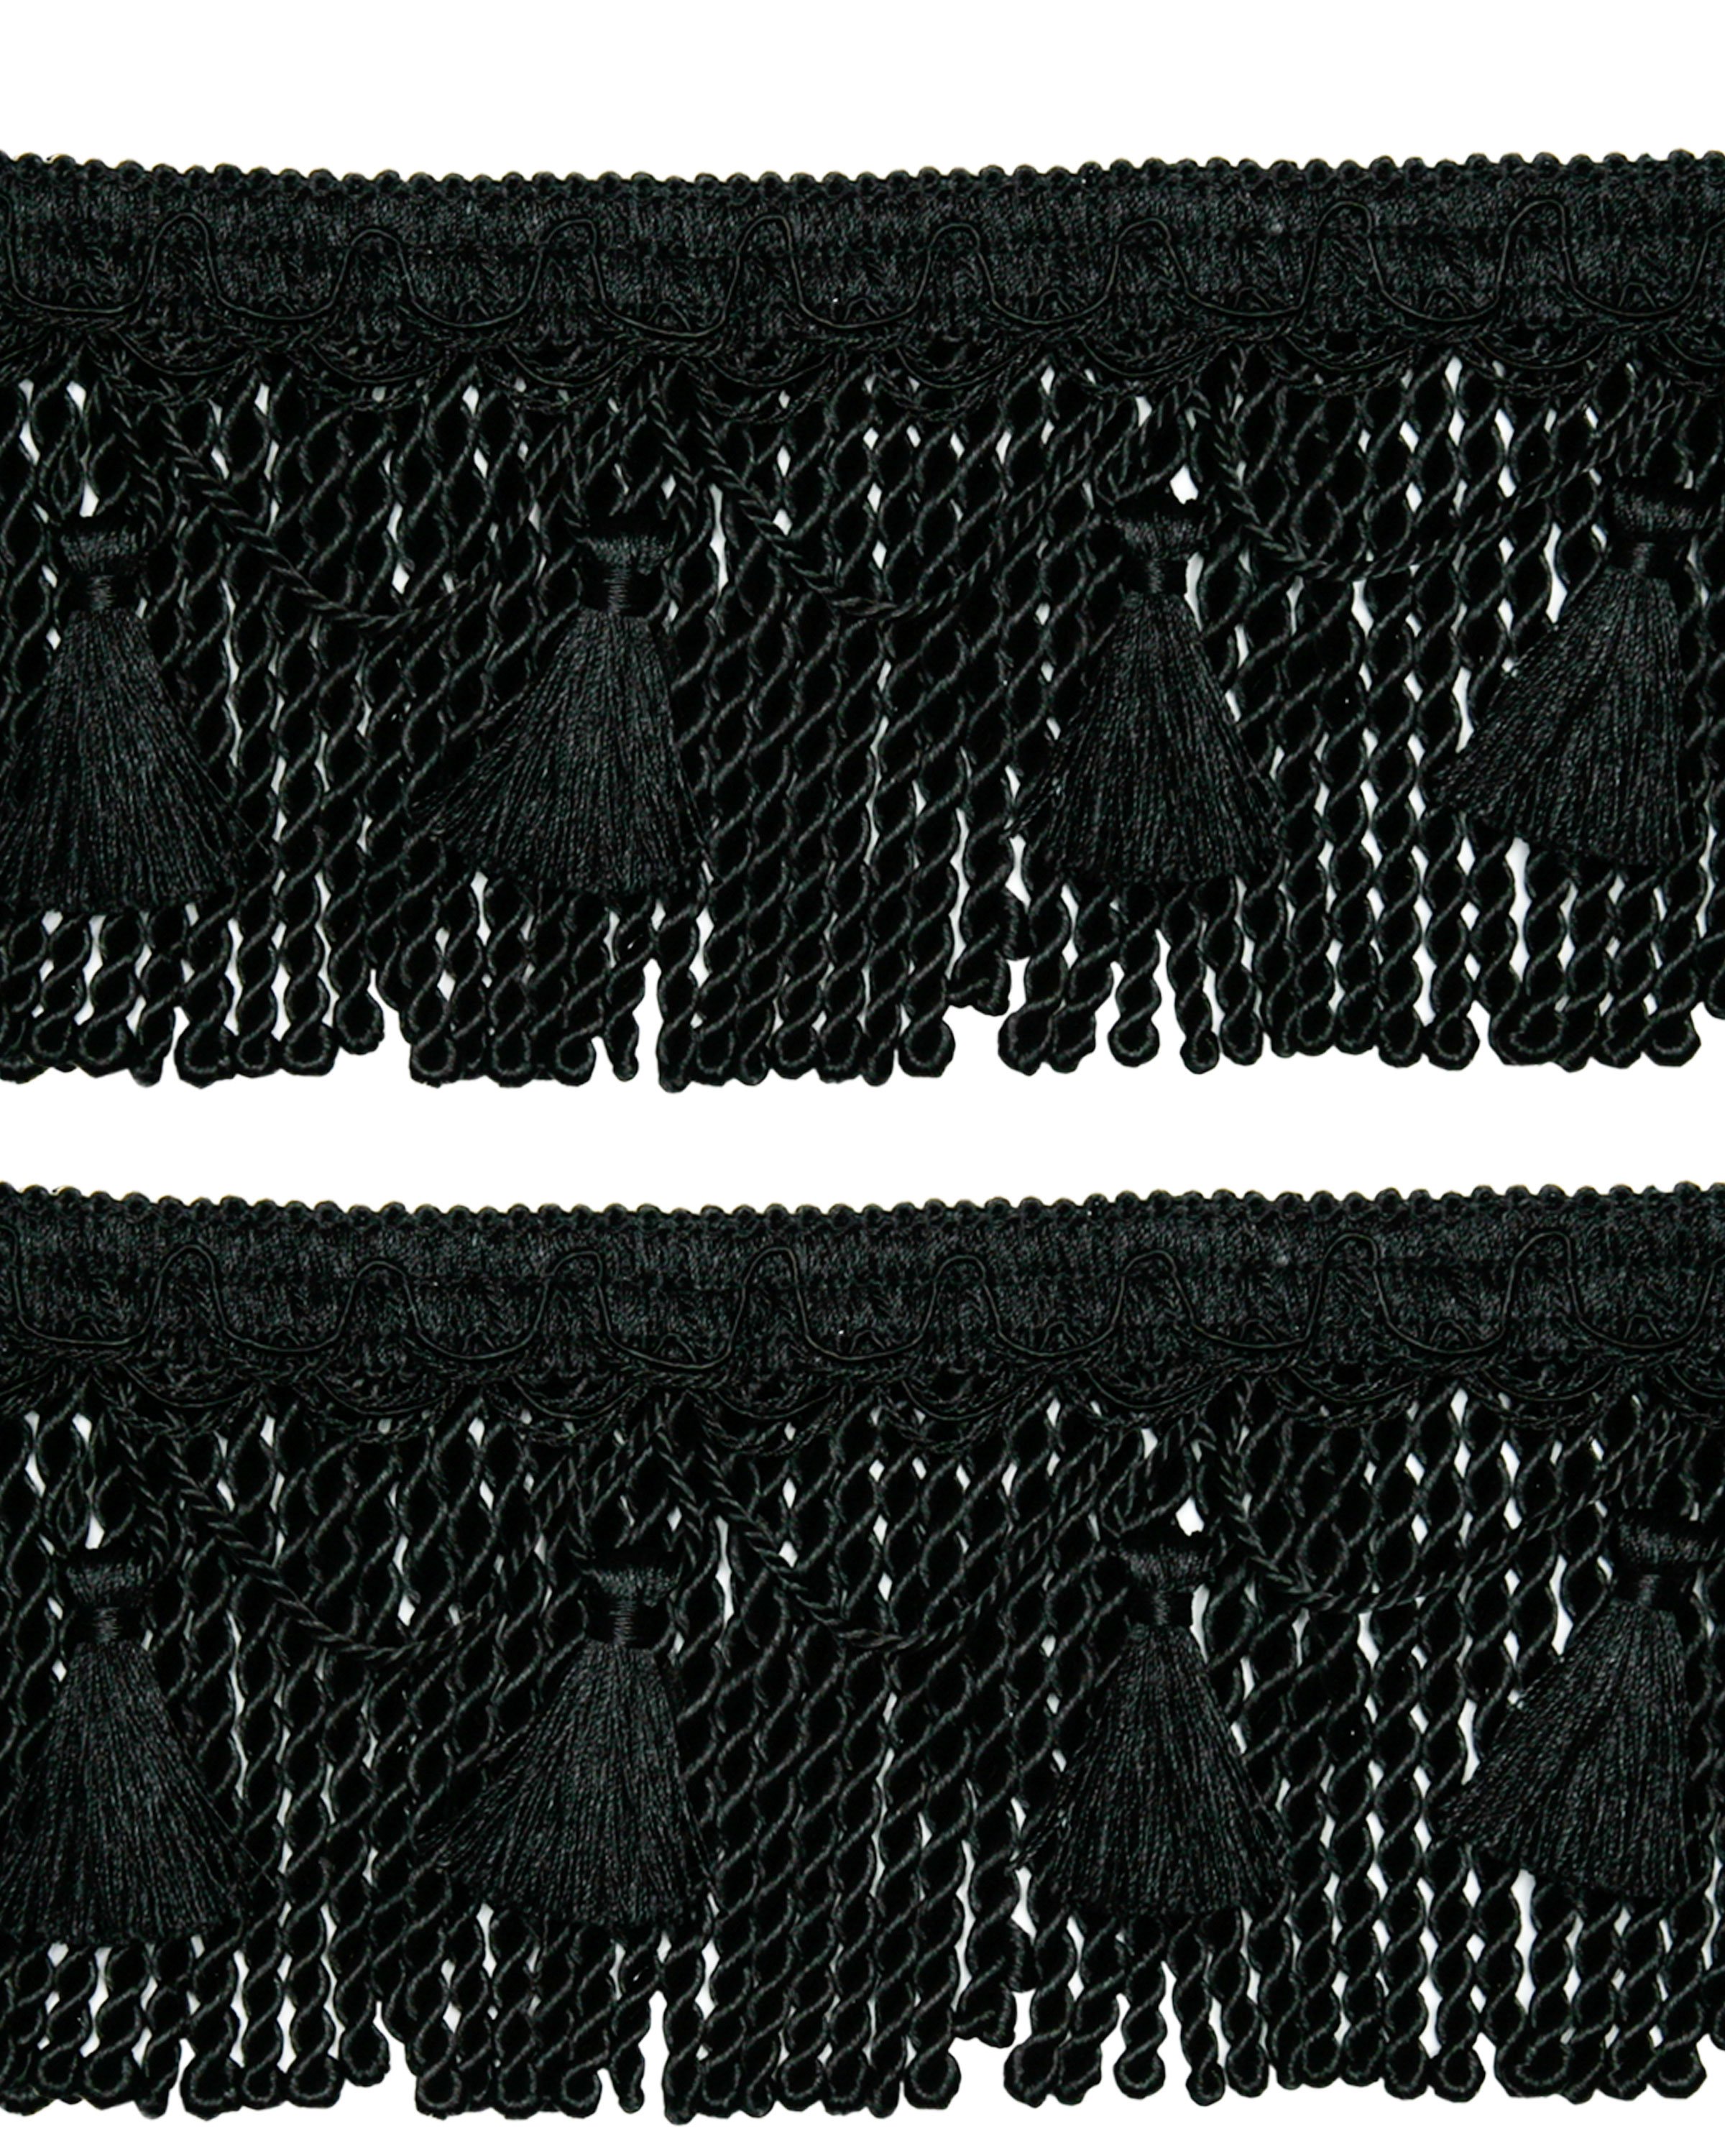 Bullion Cord Fringe on Braid with Scalloped Tassel - Black 105mm Price is for 5 metres